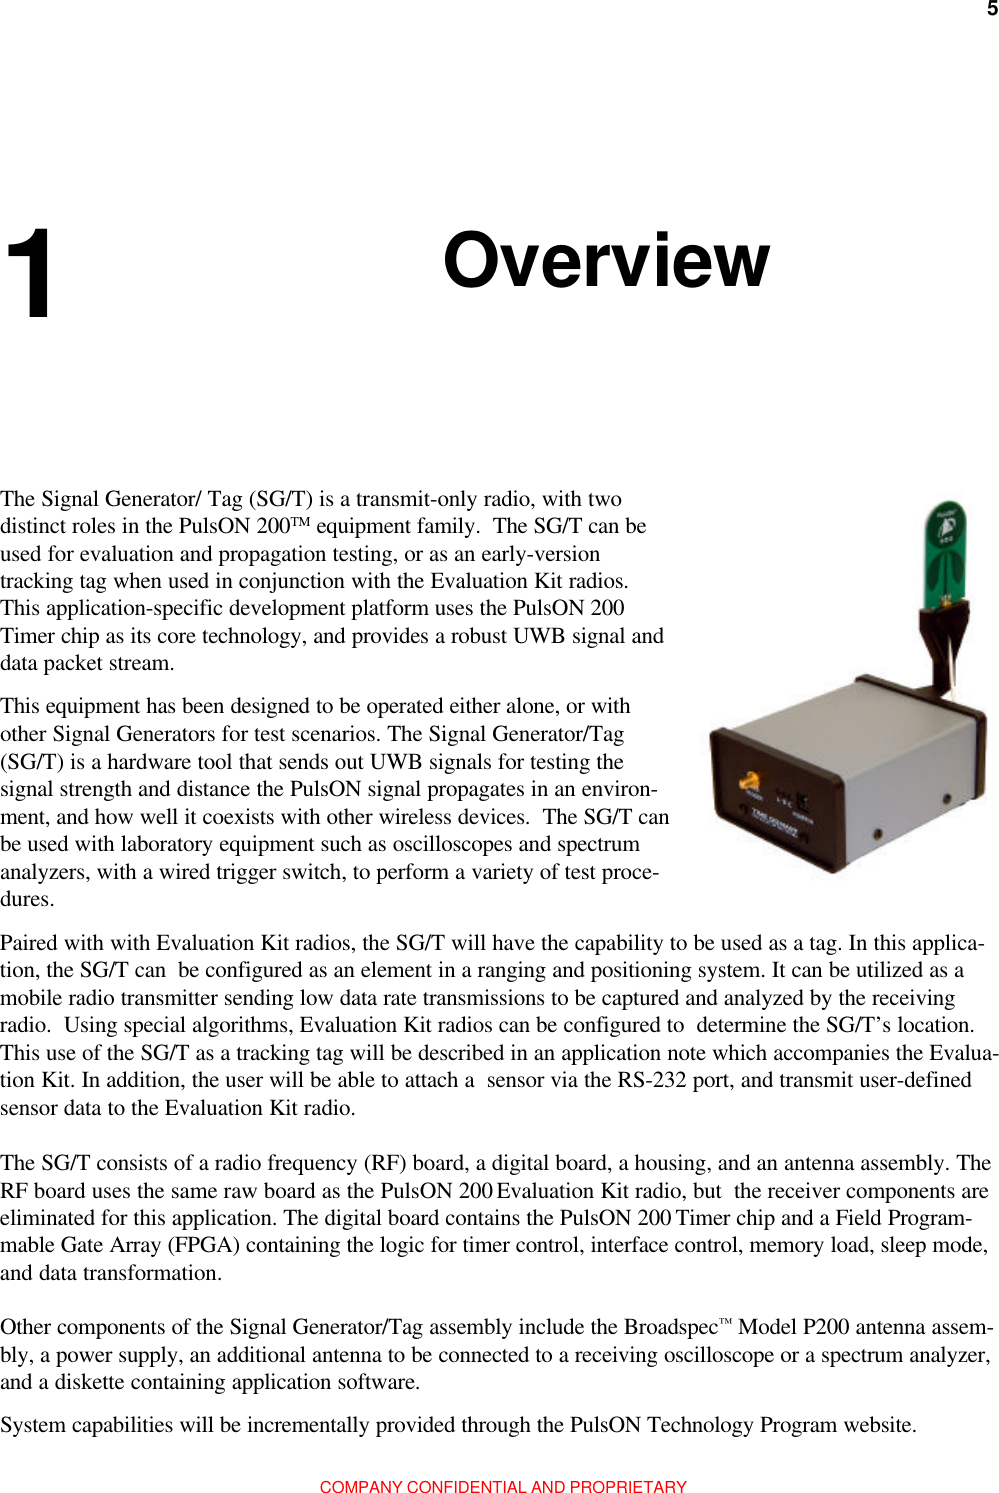 5Chapter 1: OverviewCOMPANY CONFIDENTIAL AND PROPRIETARYOverviewPaired with with Evaluation Kit radios, the SG/T will have the capability to be used as a tag. In this applica-tion, the SG/T can  be configured as an element in a ranging and positioning system. It can be utilized as amobile radio transmitter sending low data rate transmissions to be captured and analyzed by the receivingradio.  Using special algorithms, Evaluation Kit radios can be configured to  determine the SG/T’s location.This use of the SG/T as a tracking tag will be described in an application note which accompanies the Evalua-tion Kit. In addition, the user will be able to attach a  sensor via the RS-232 port, and transmit user-definedsensor data to the Evaluation Kit radio.This equipment has been designed to be operated either alone, or withother Signal Generators for test scenarios. The Signal Generator/Tag(SG/T) is a hardware tool that sends out UWB signals for testing thesignal strength and distance the PulsON signal propagates in an environ-ment, and how well it coexists with other wireless devices.  The SG/T canbe used with laboratory equipment such as oscilloscopes and spectrumanalyzers, with a wired trigger switch, to perform a variety of test proce-dures.The Signal Generator/ Tag (SG/T) is a transmit-only radio, with twodistinct roles in the PulsON 200TM equipment family.  The SG/T can beused for evaluation and propagation testing, or as an early-versiontracking tag when used in conjunction with the Evaluation Kit radios.This application-specific development platform uses the PulsON 200Timer chip as its core technology, and provides a robust UWB signal anddata packet stream.The SG/T consists of a radio frequency (RF) board, a digital board, a housing, and an antenna assembly. TheRF board uses the same raw board as the PulsON 200 Evaluation Kit radio, but  the receiver components areeliminated for this application. The digital board contains the PulsON 200 Timer chip and a Field Program-mable Gate Array (FPGA) containing the logic for timer control, interface control, memory load, sleep mode,and data transformation.1 Other components of the Signal Generator/Tag assembly include the Broadspec™ Model P200 antenna assem-bly, a power supply, an additional antenna to be connected to a receiving oscilloscope or a spectrum analyzer,and a diskette containing application software.System capabilities will be incrementally provided through the PulsON Technology Program website.